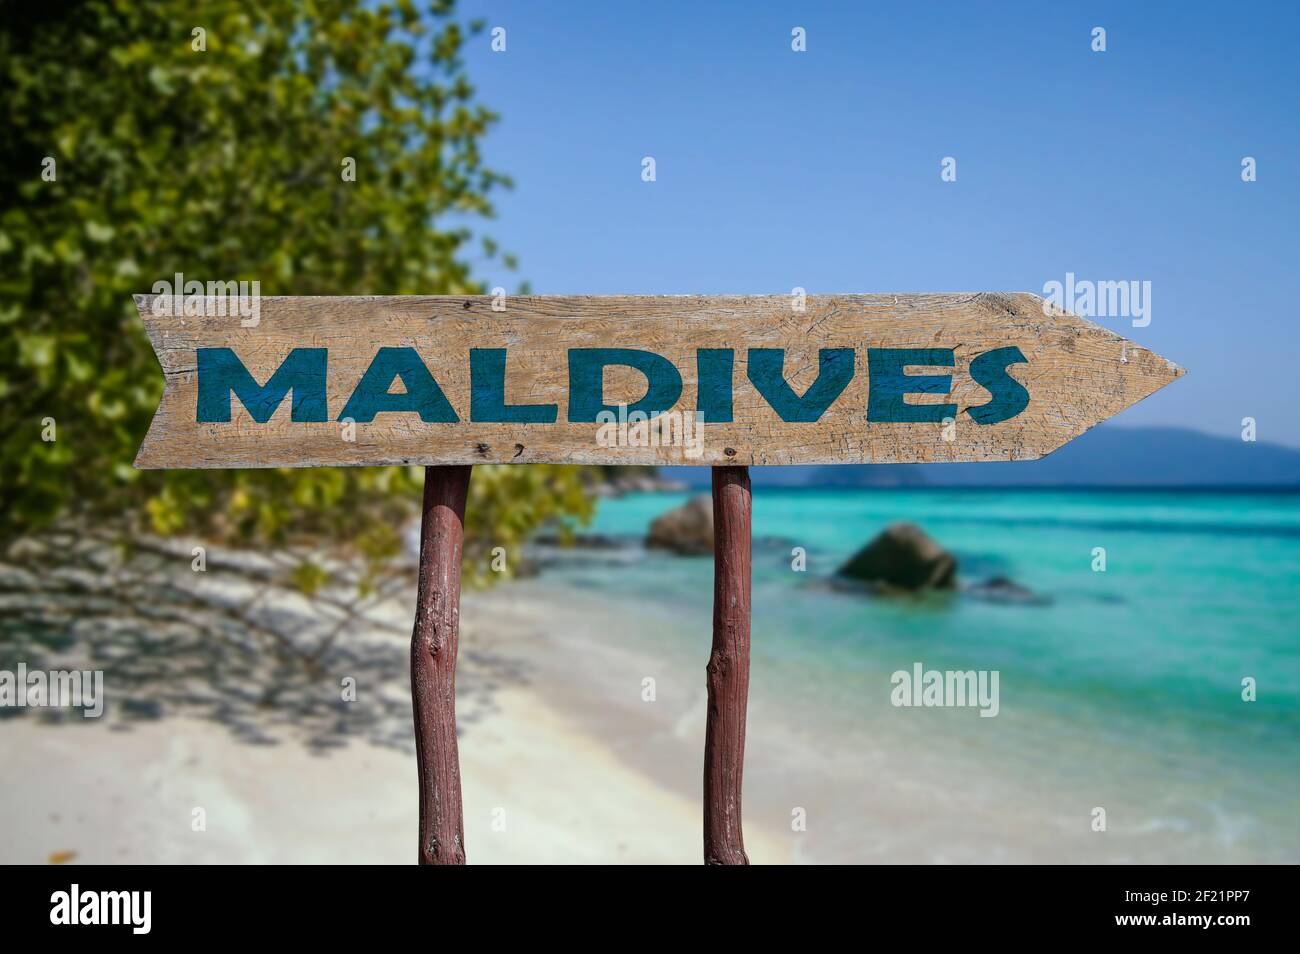 Maldives wooden arrow road sign against tropical beach with white sand and turquoise water background. Travel to Maldives concept. Stock Photo